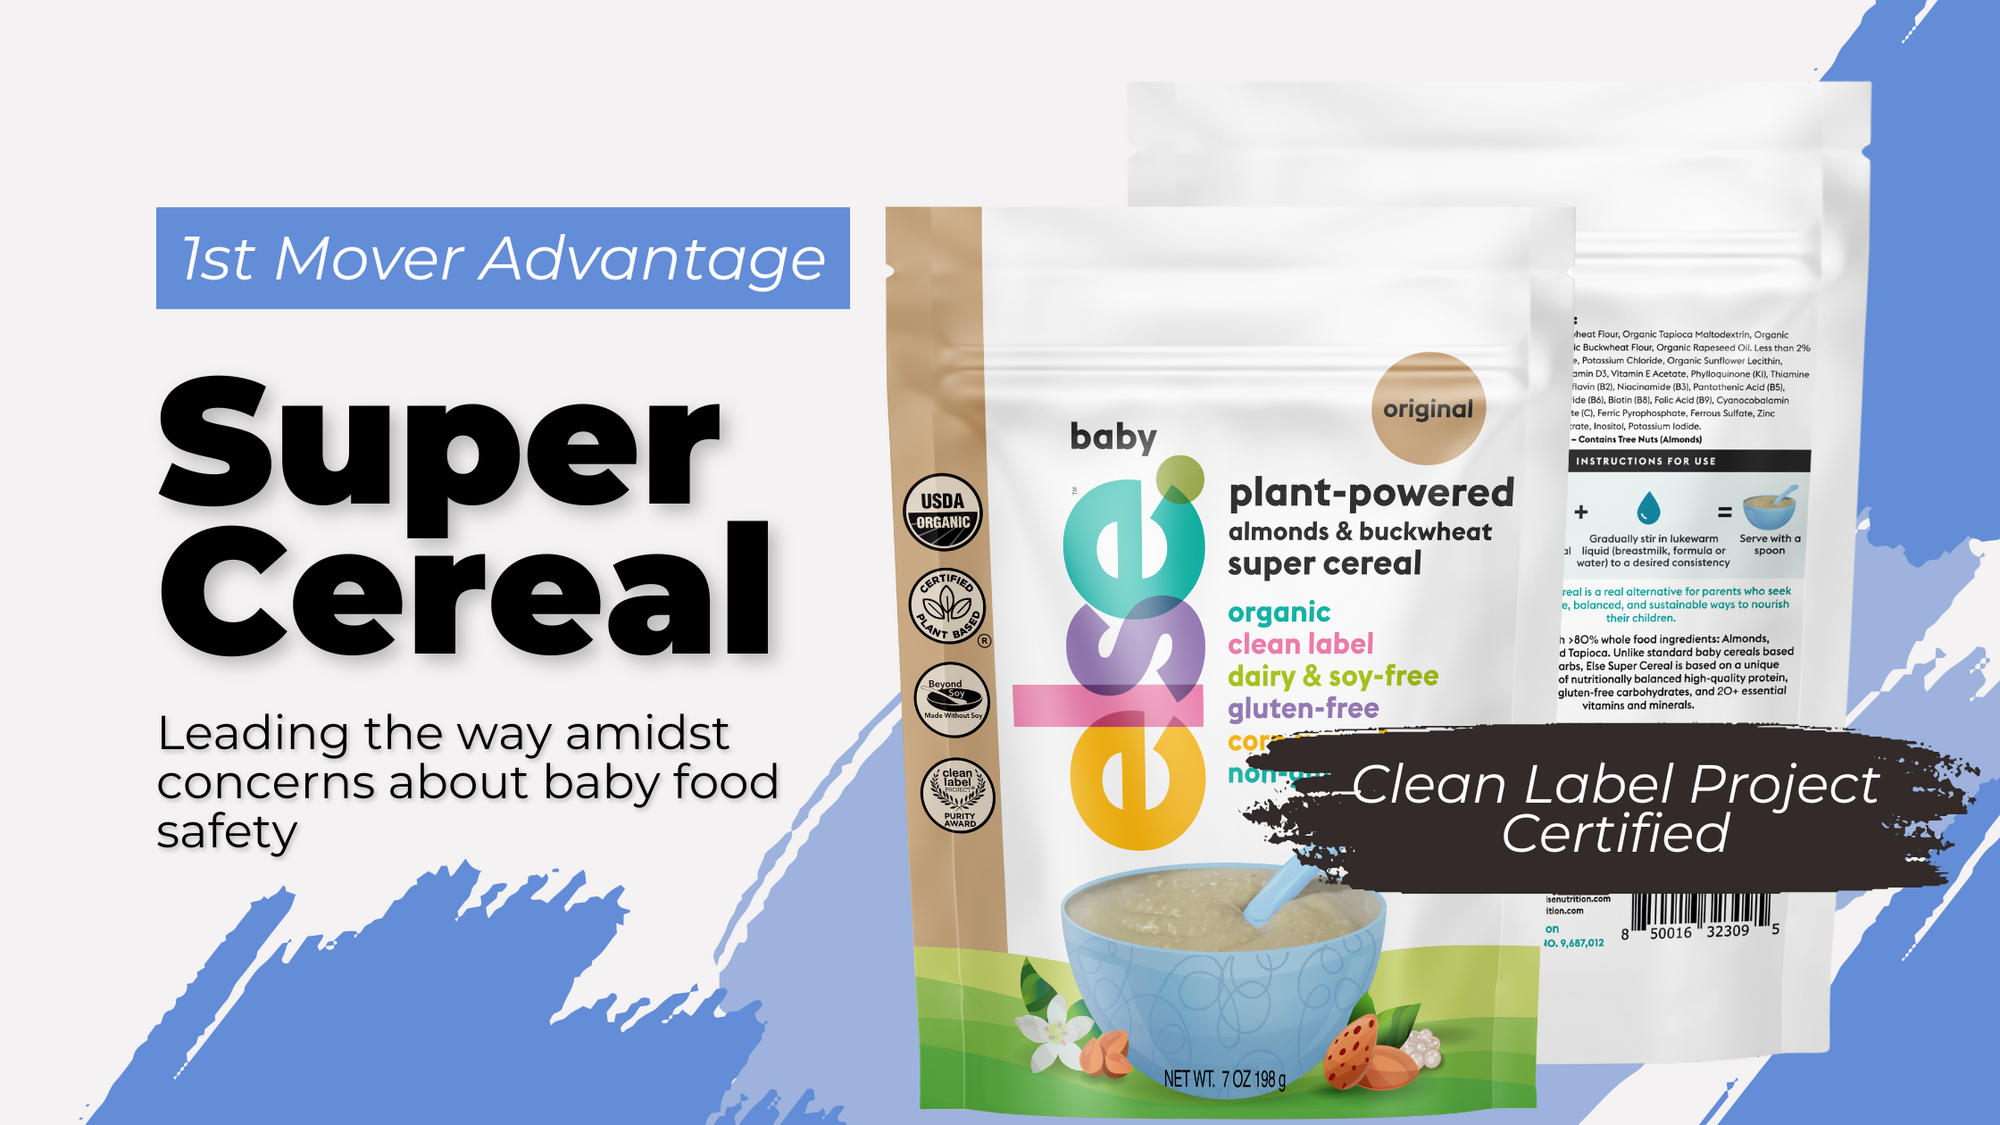 Super Cereal Benefits from First Mover Advantage Amidst Rising Safety Concerns for Baby Food